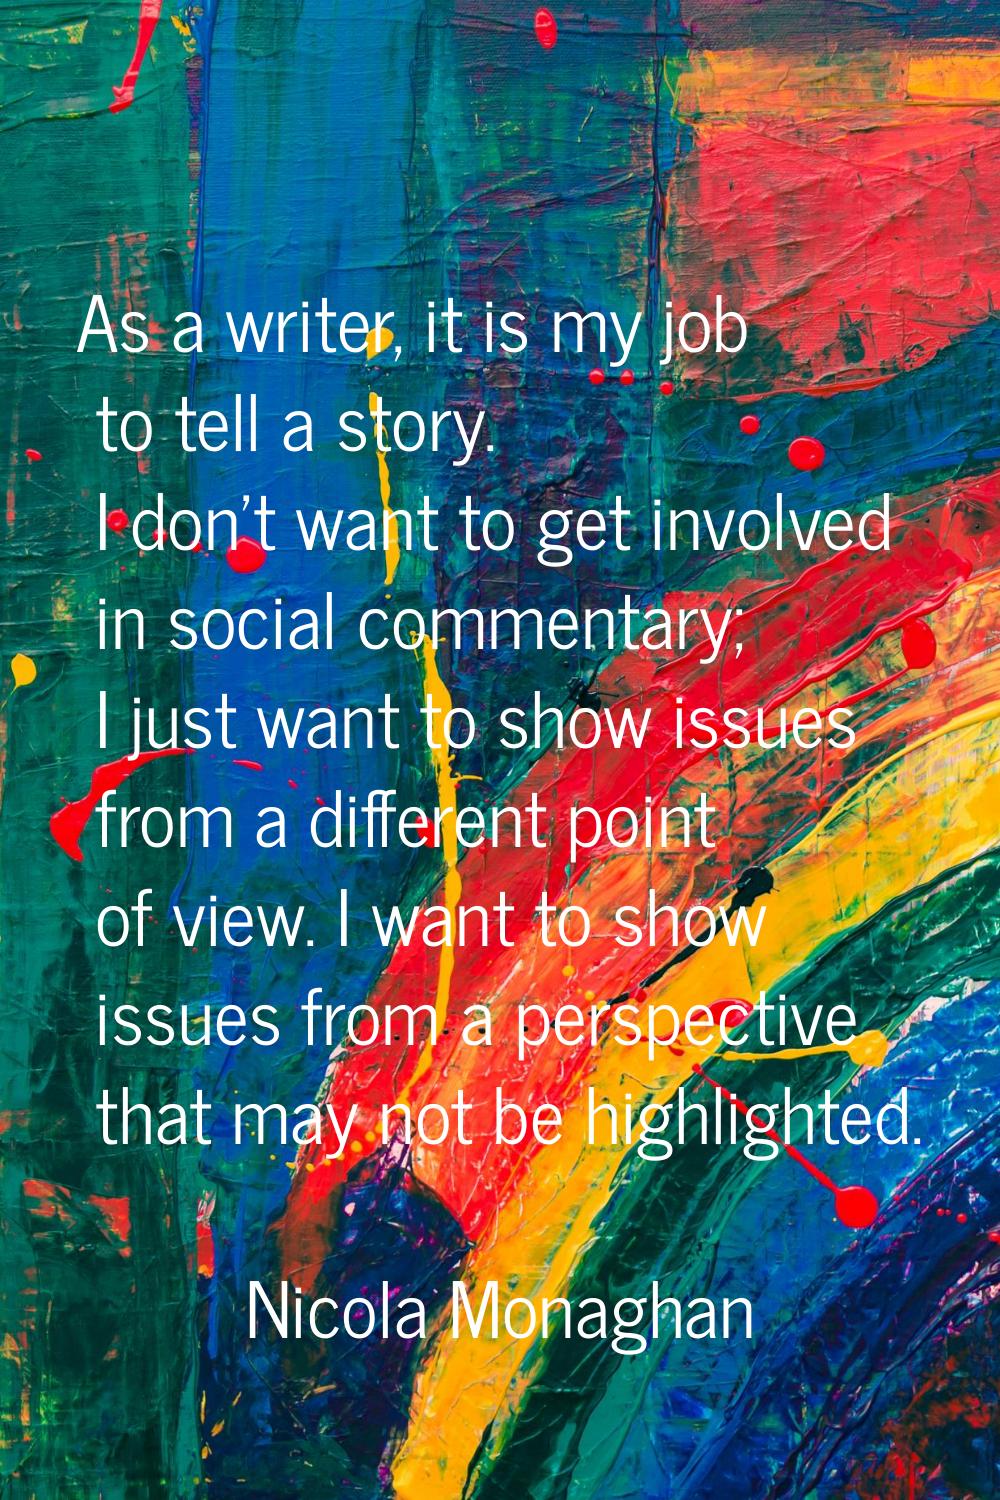 As a writer, it is my job to tell a story. I don't want to get involved in social commentary; I jus